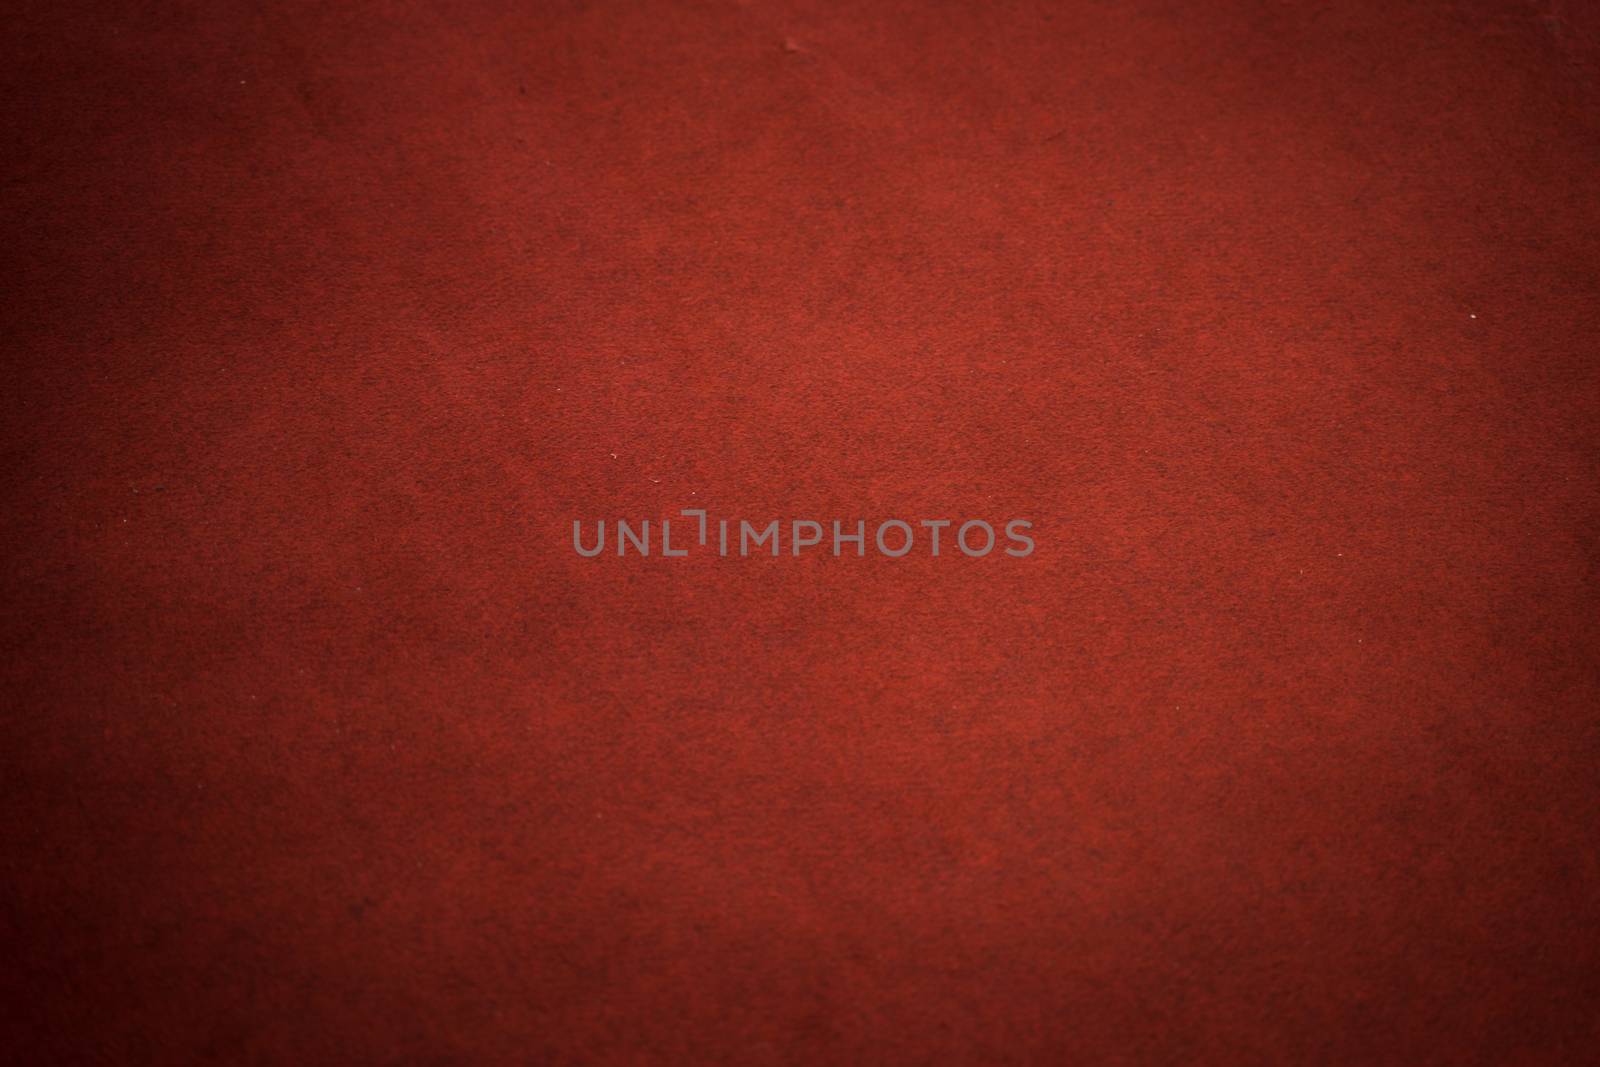 The Abstract dark red texture. Abstract watercolor hand painted background.